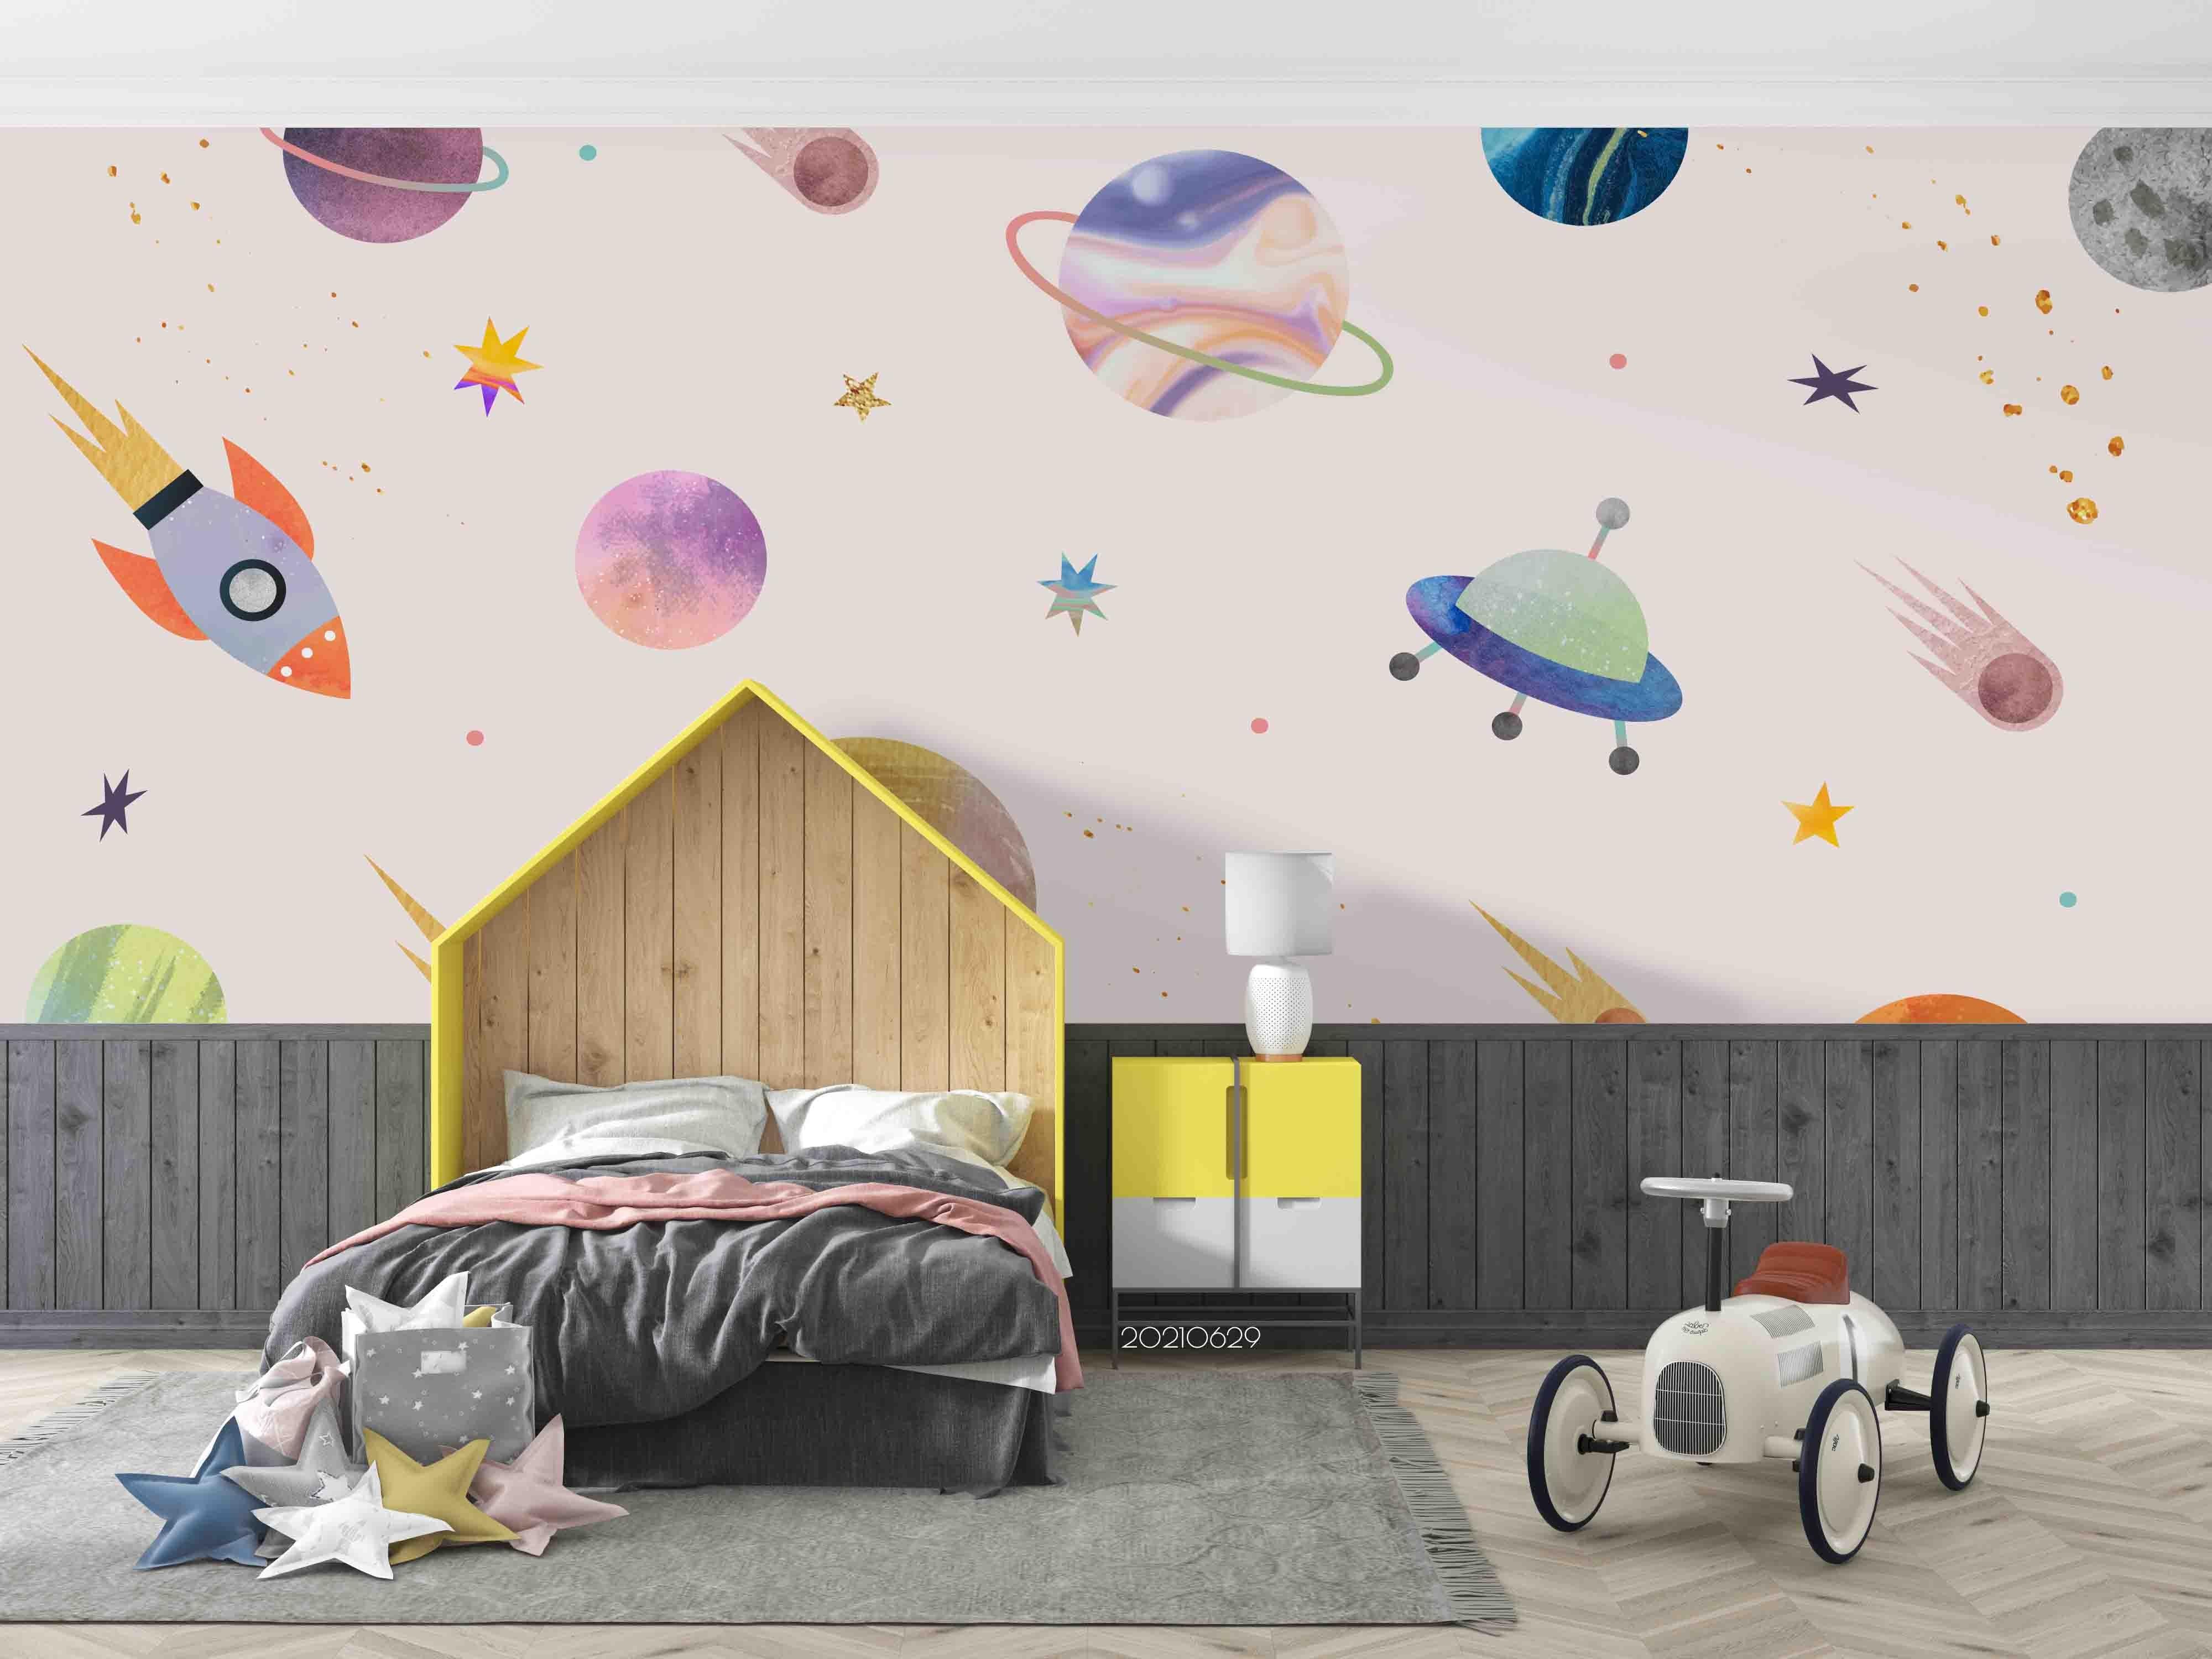 3D Hand Drawn Space Color Planet Galaxy Wall Mural Wallpaper LQH 21- Jess Art Decoration